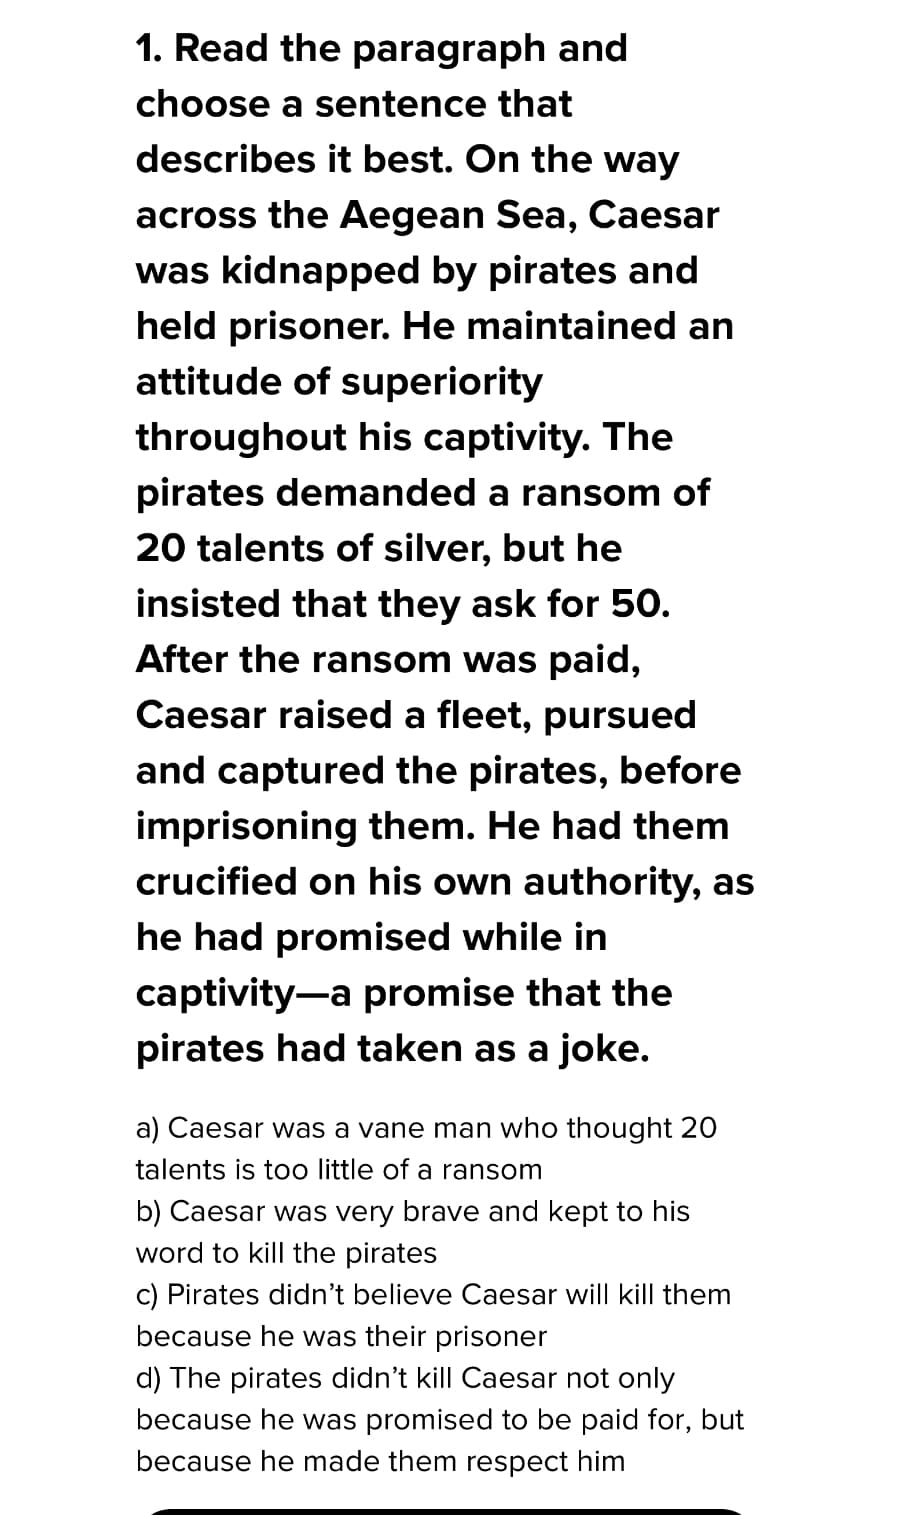 1. Read the paragraph and
choose a sentence that
describes it best. On the way
across the Aegean Sea, Caesar
was kidnapped by pirates and
held prisoner. He maintained an
attitude of superiority
throughout his captivity. The
pirates demanded a ransom of
20 talents of silver, but he
insisted that they ask for 50.
After the ransom was paid,
Caesar raised a fleet, pursued
and captured the pirates, before
imprisoning them. He had them
crucified on his own authority, as
he had promised while in
captivity-a promise that the
pirates had taken as a joke.
a) Caesar was a vane man who thought 20
talents is too little of a ransom
b) Caesar was very brave and kept to his
word to kill the pirates
c) Pirates didn't believe Caesar will kill them
because he was their prisoner
d) The pirates didn't kill Caesar not only
because he was promised to be paid for, but
because he made them respect him